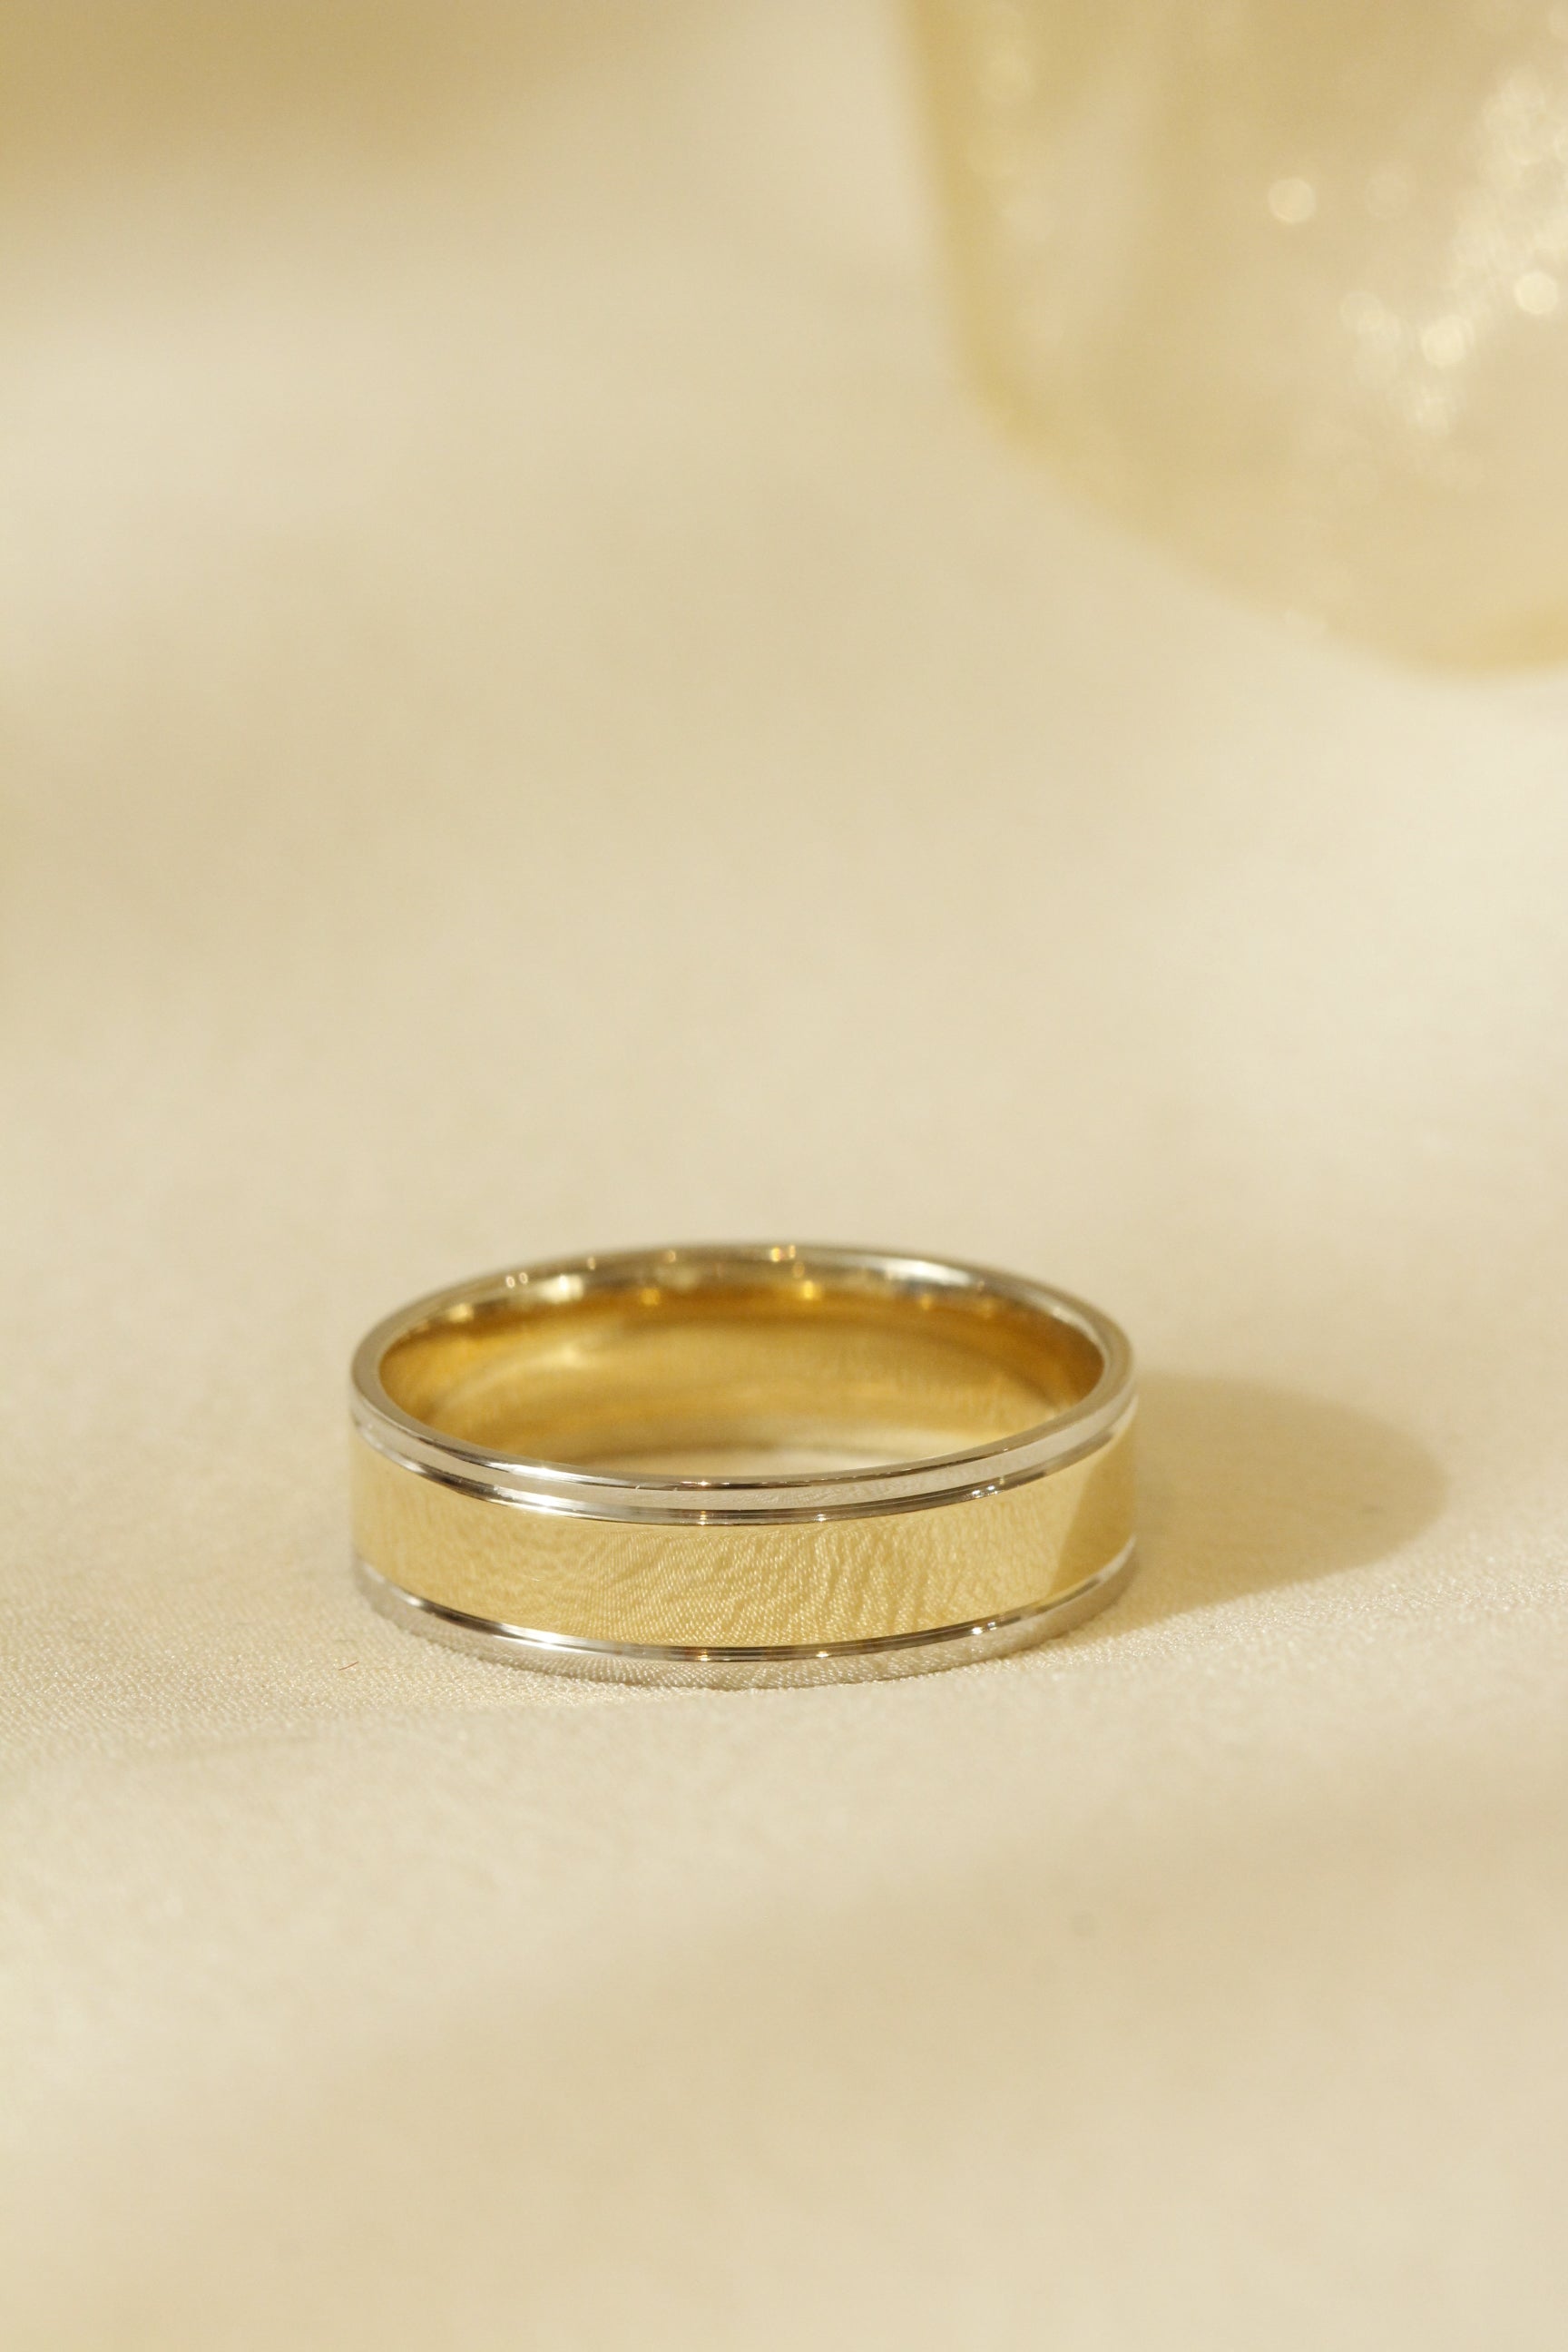 Yellow and white gold men's wedding band